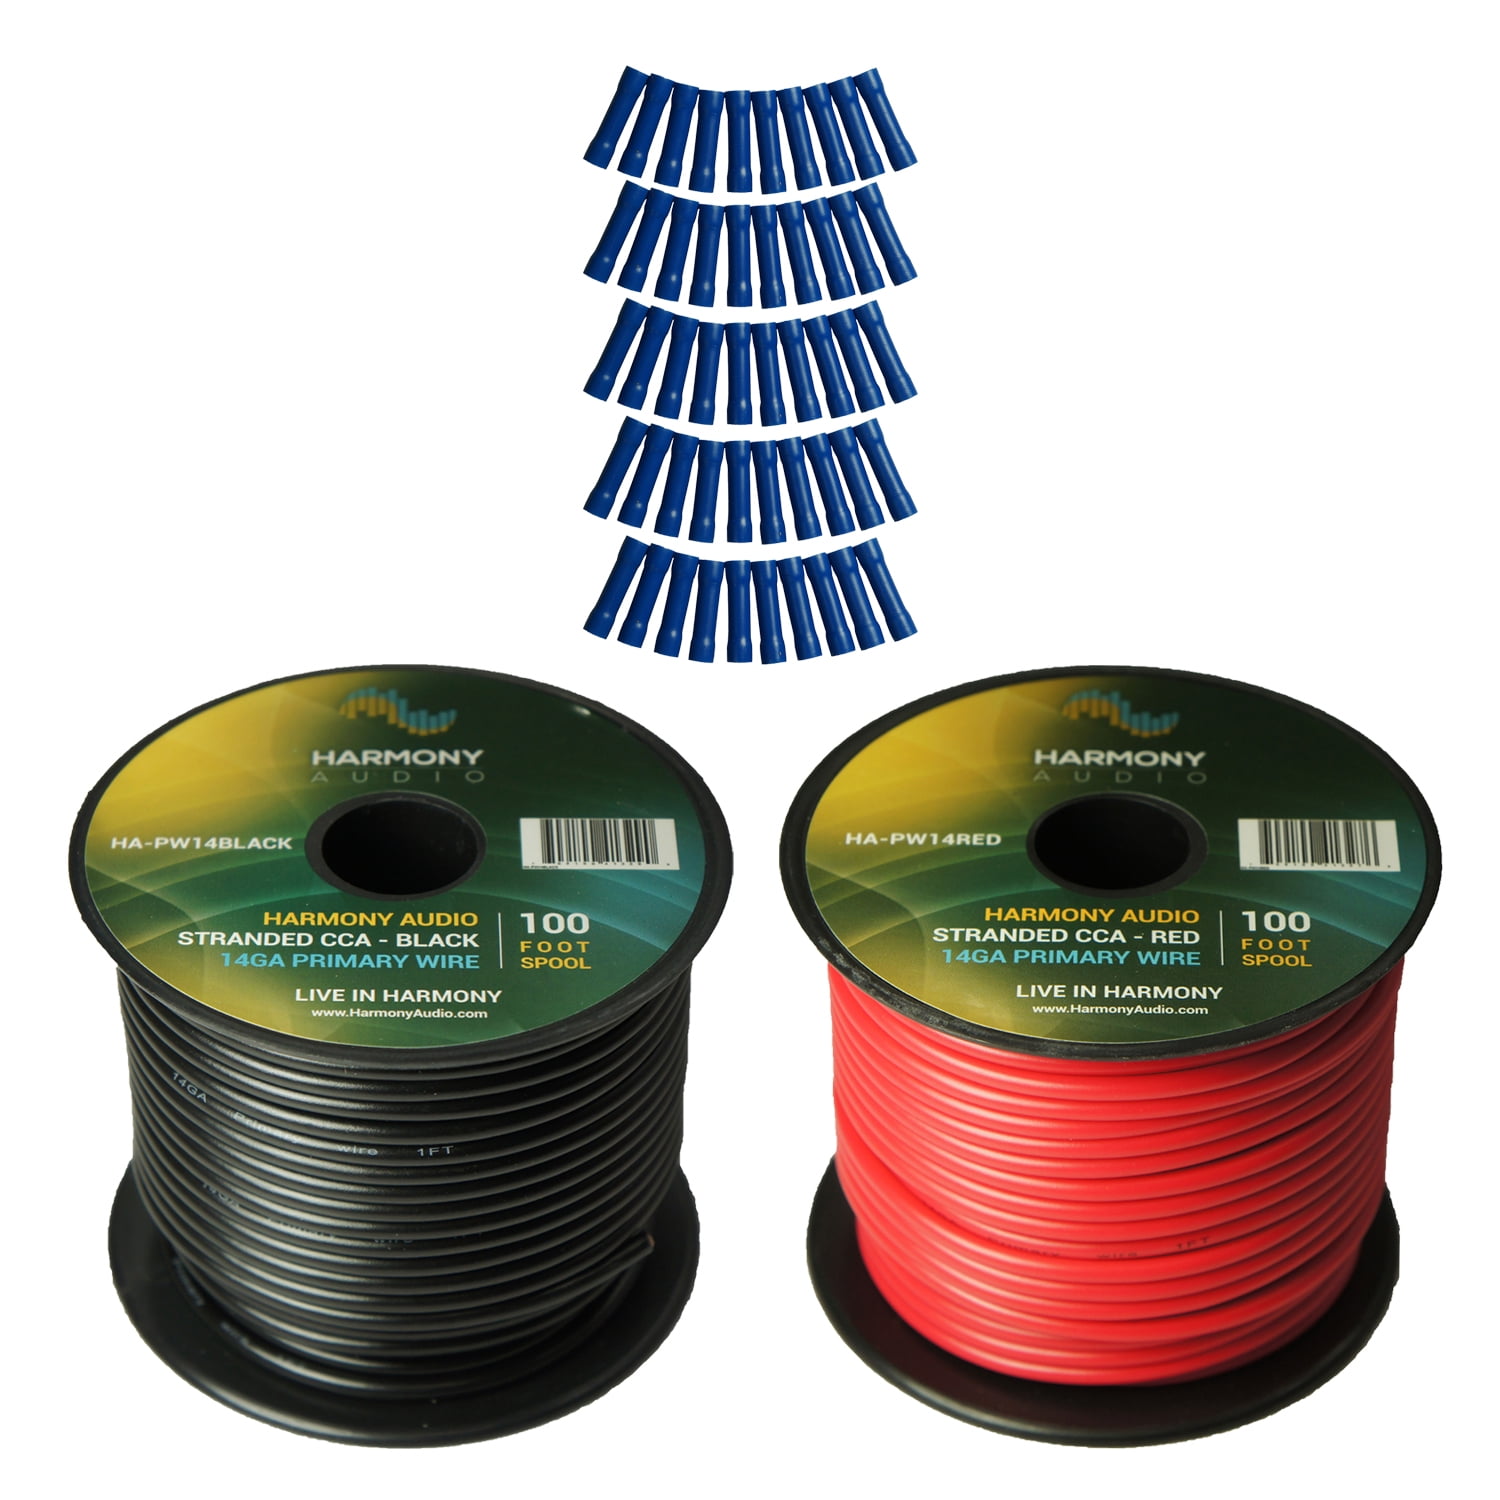 Harmony Car Primary 16 Gauge Power or Ground Wire 100 Feet Spool Black Cable New 